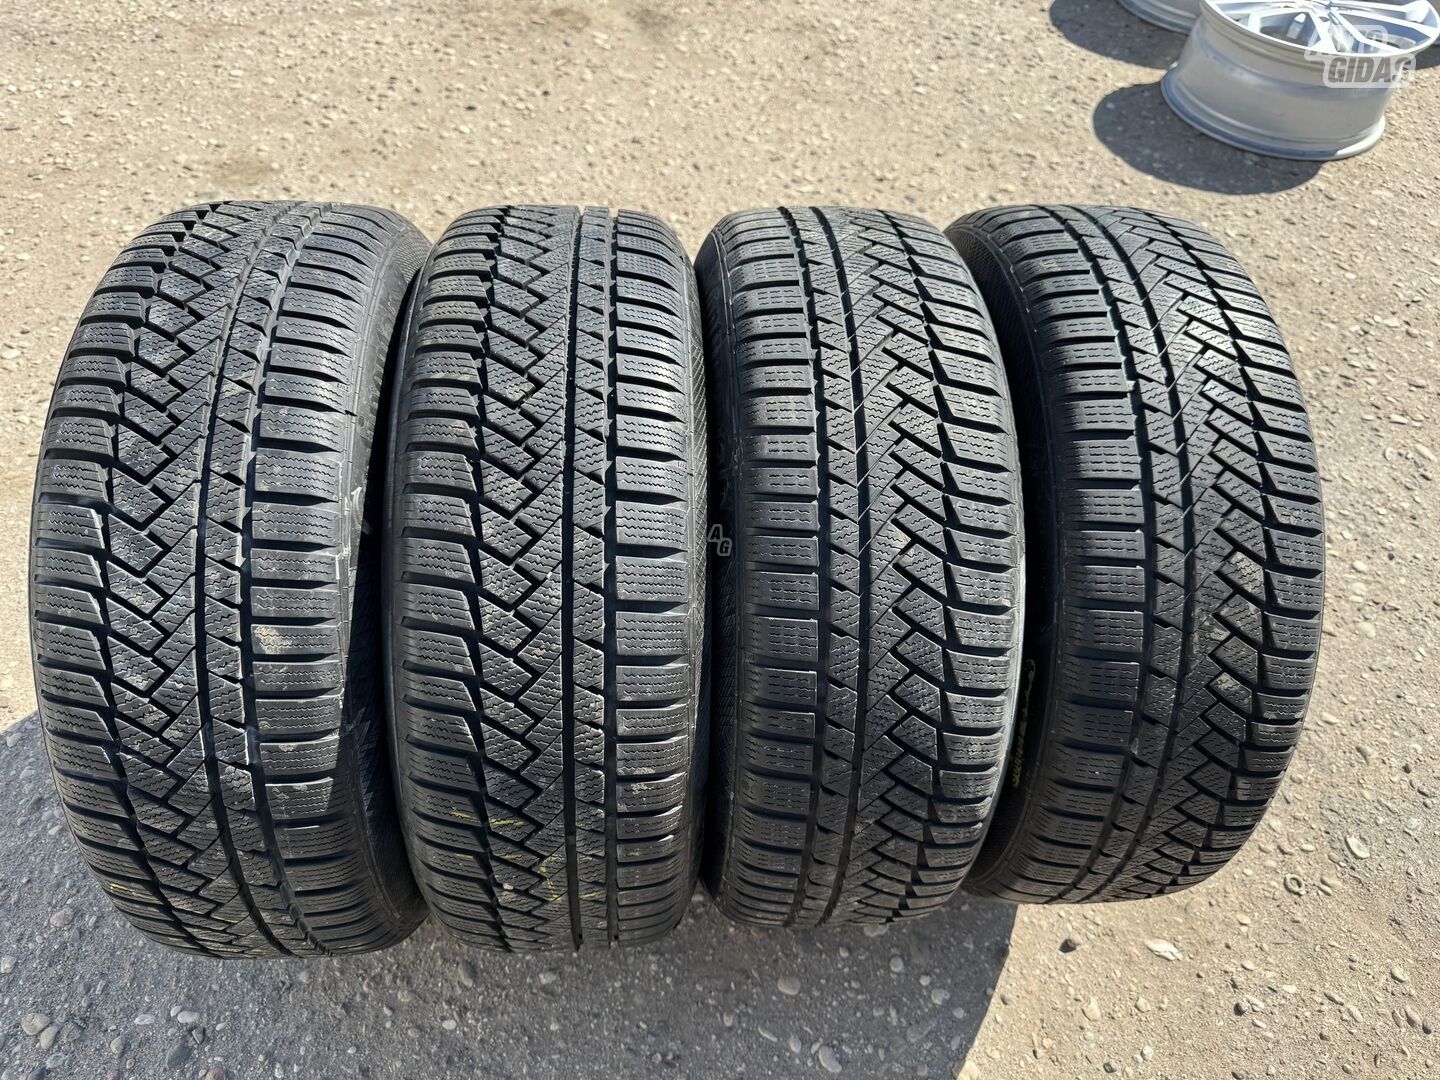 Continental Siunciam, 7-8mm 2020 R17 universal tyres passanger car